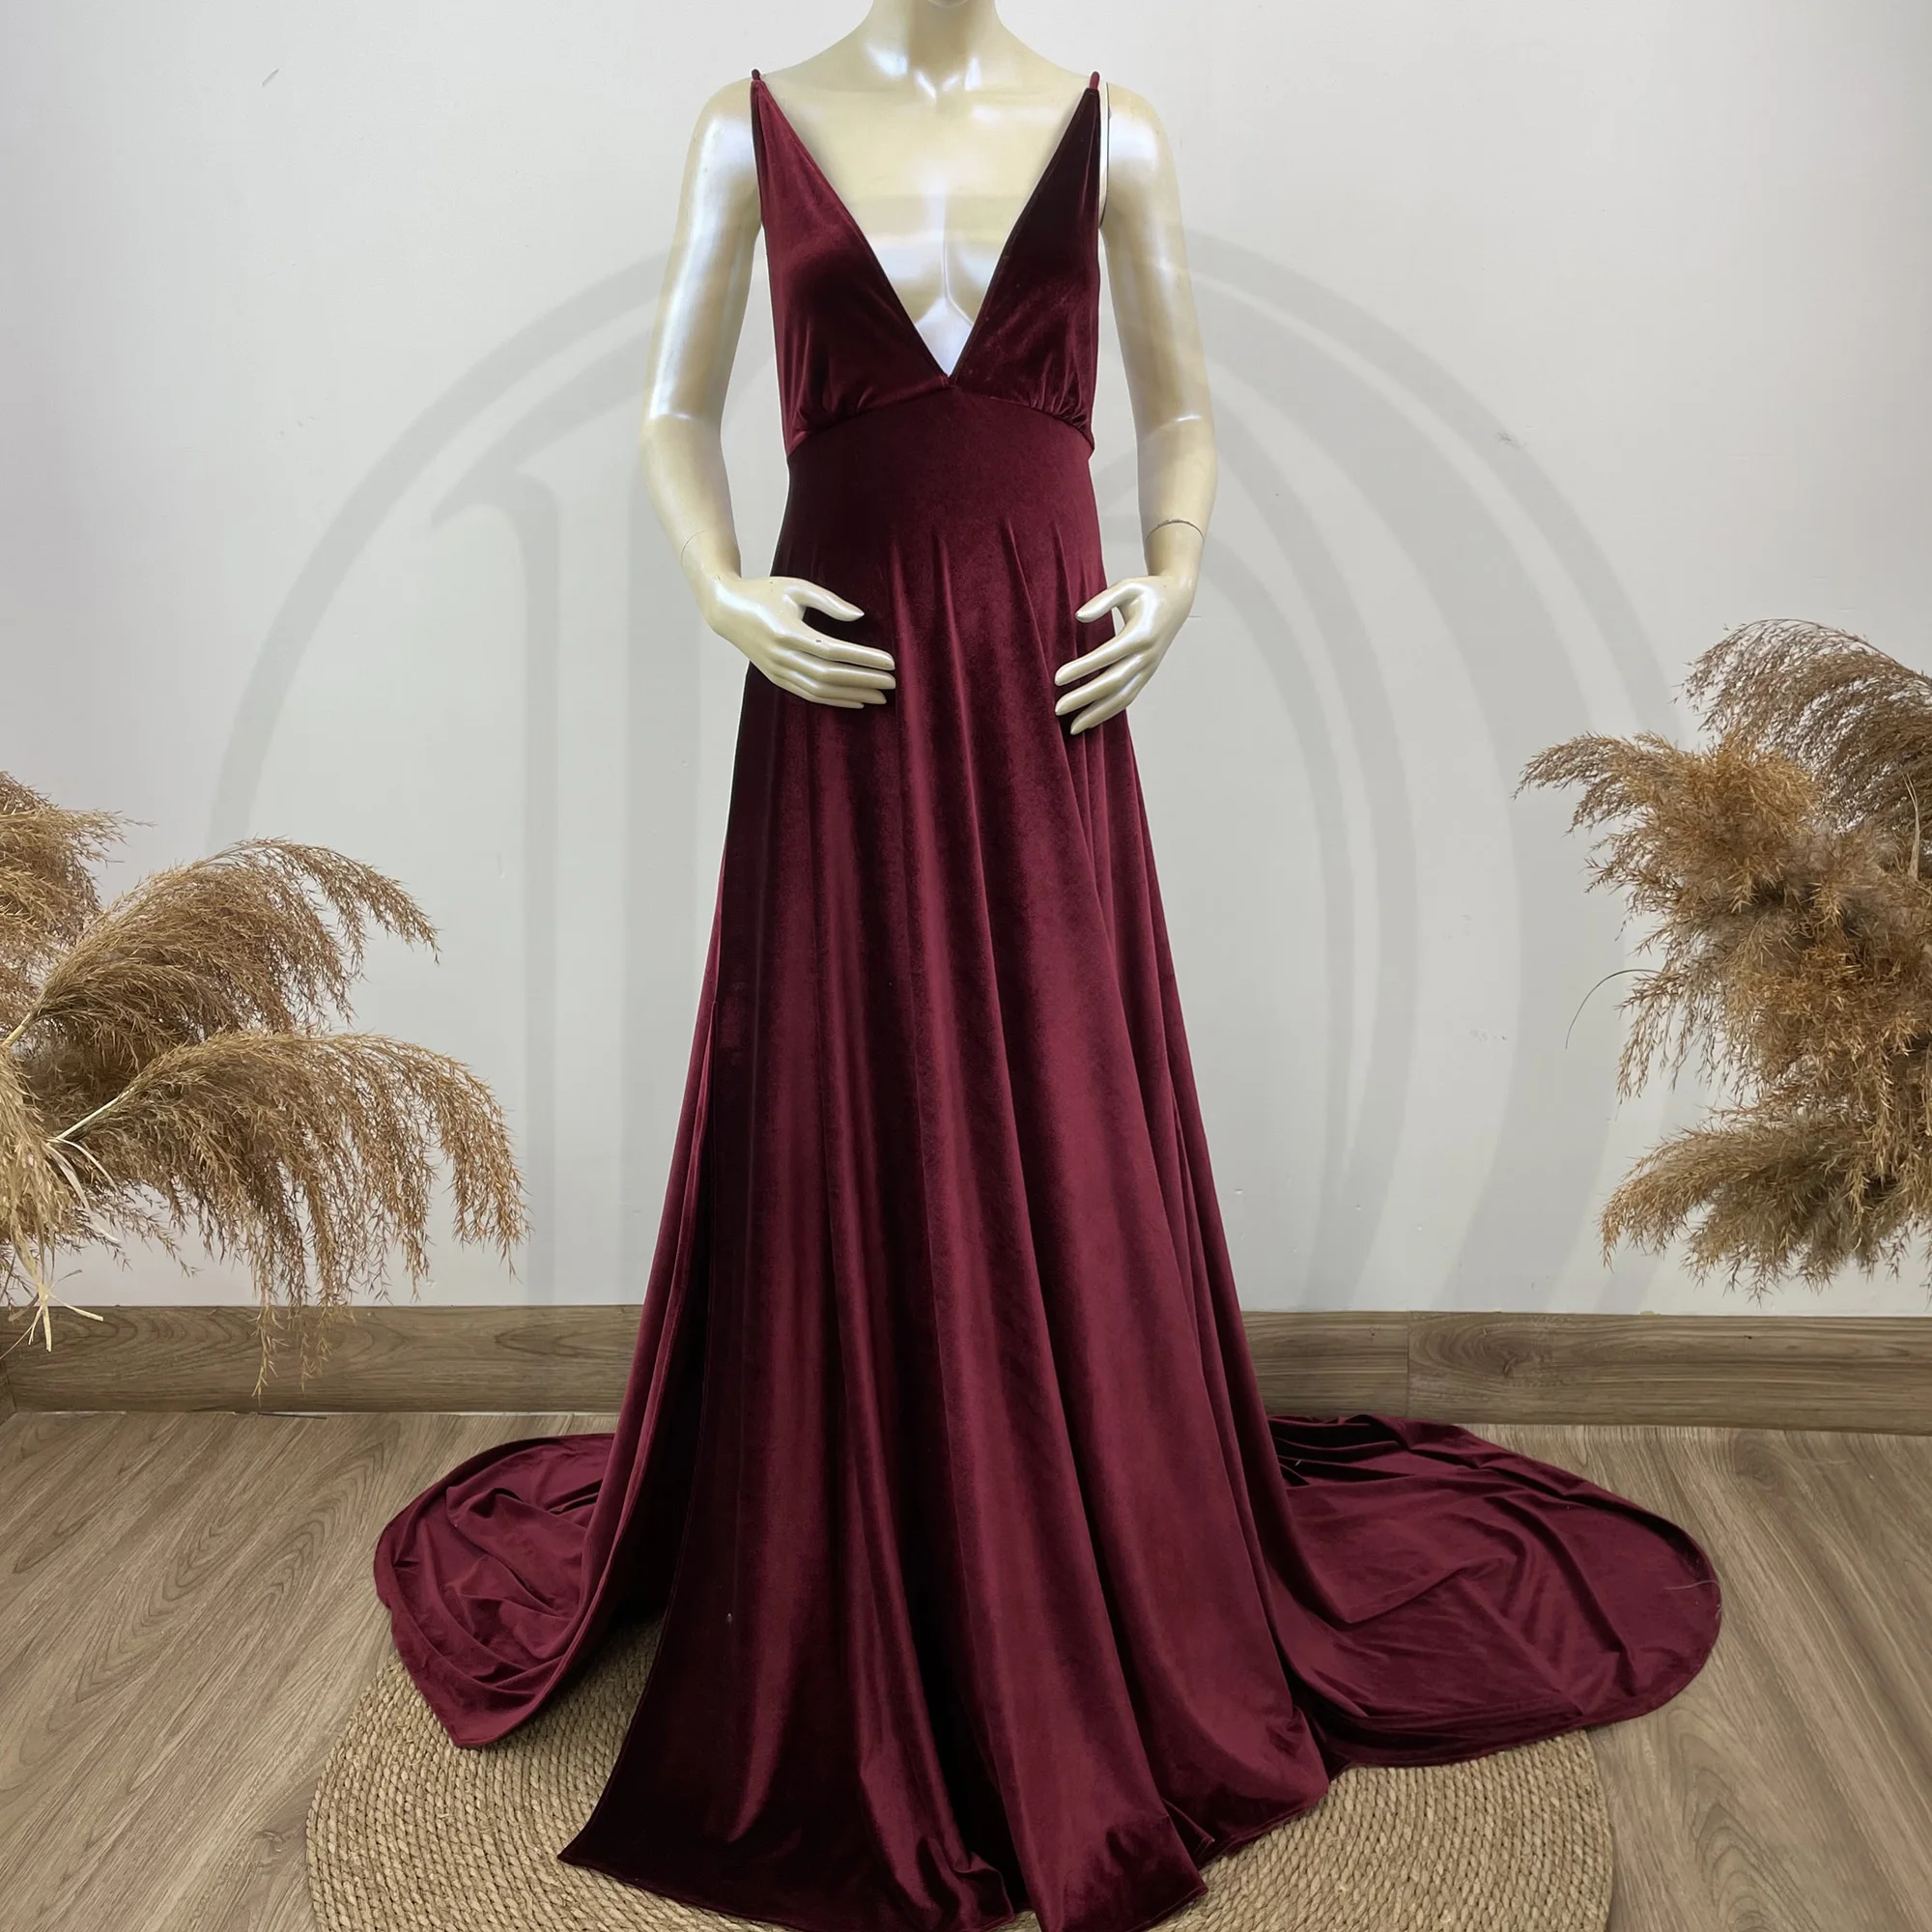 Photo Shoot Deep V Maternity Dress Pregnant Velvet Gown Evening Party Robe for Woman Photography Prop Baby Shower Costume enlarge